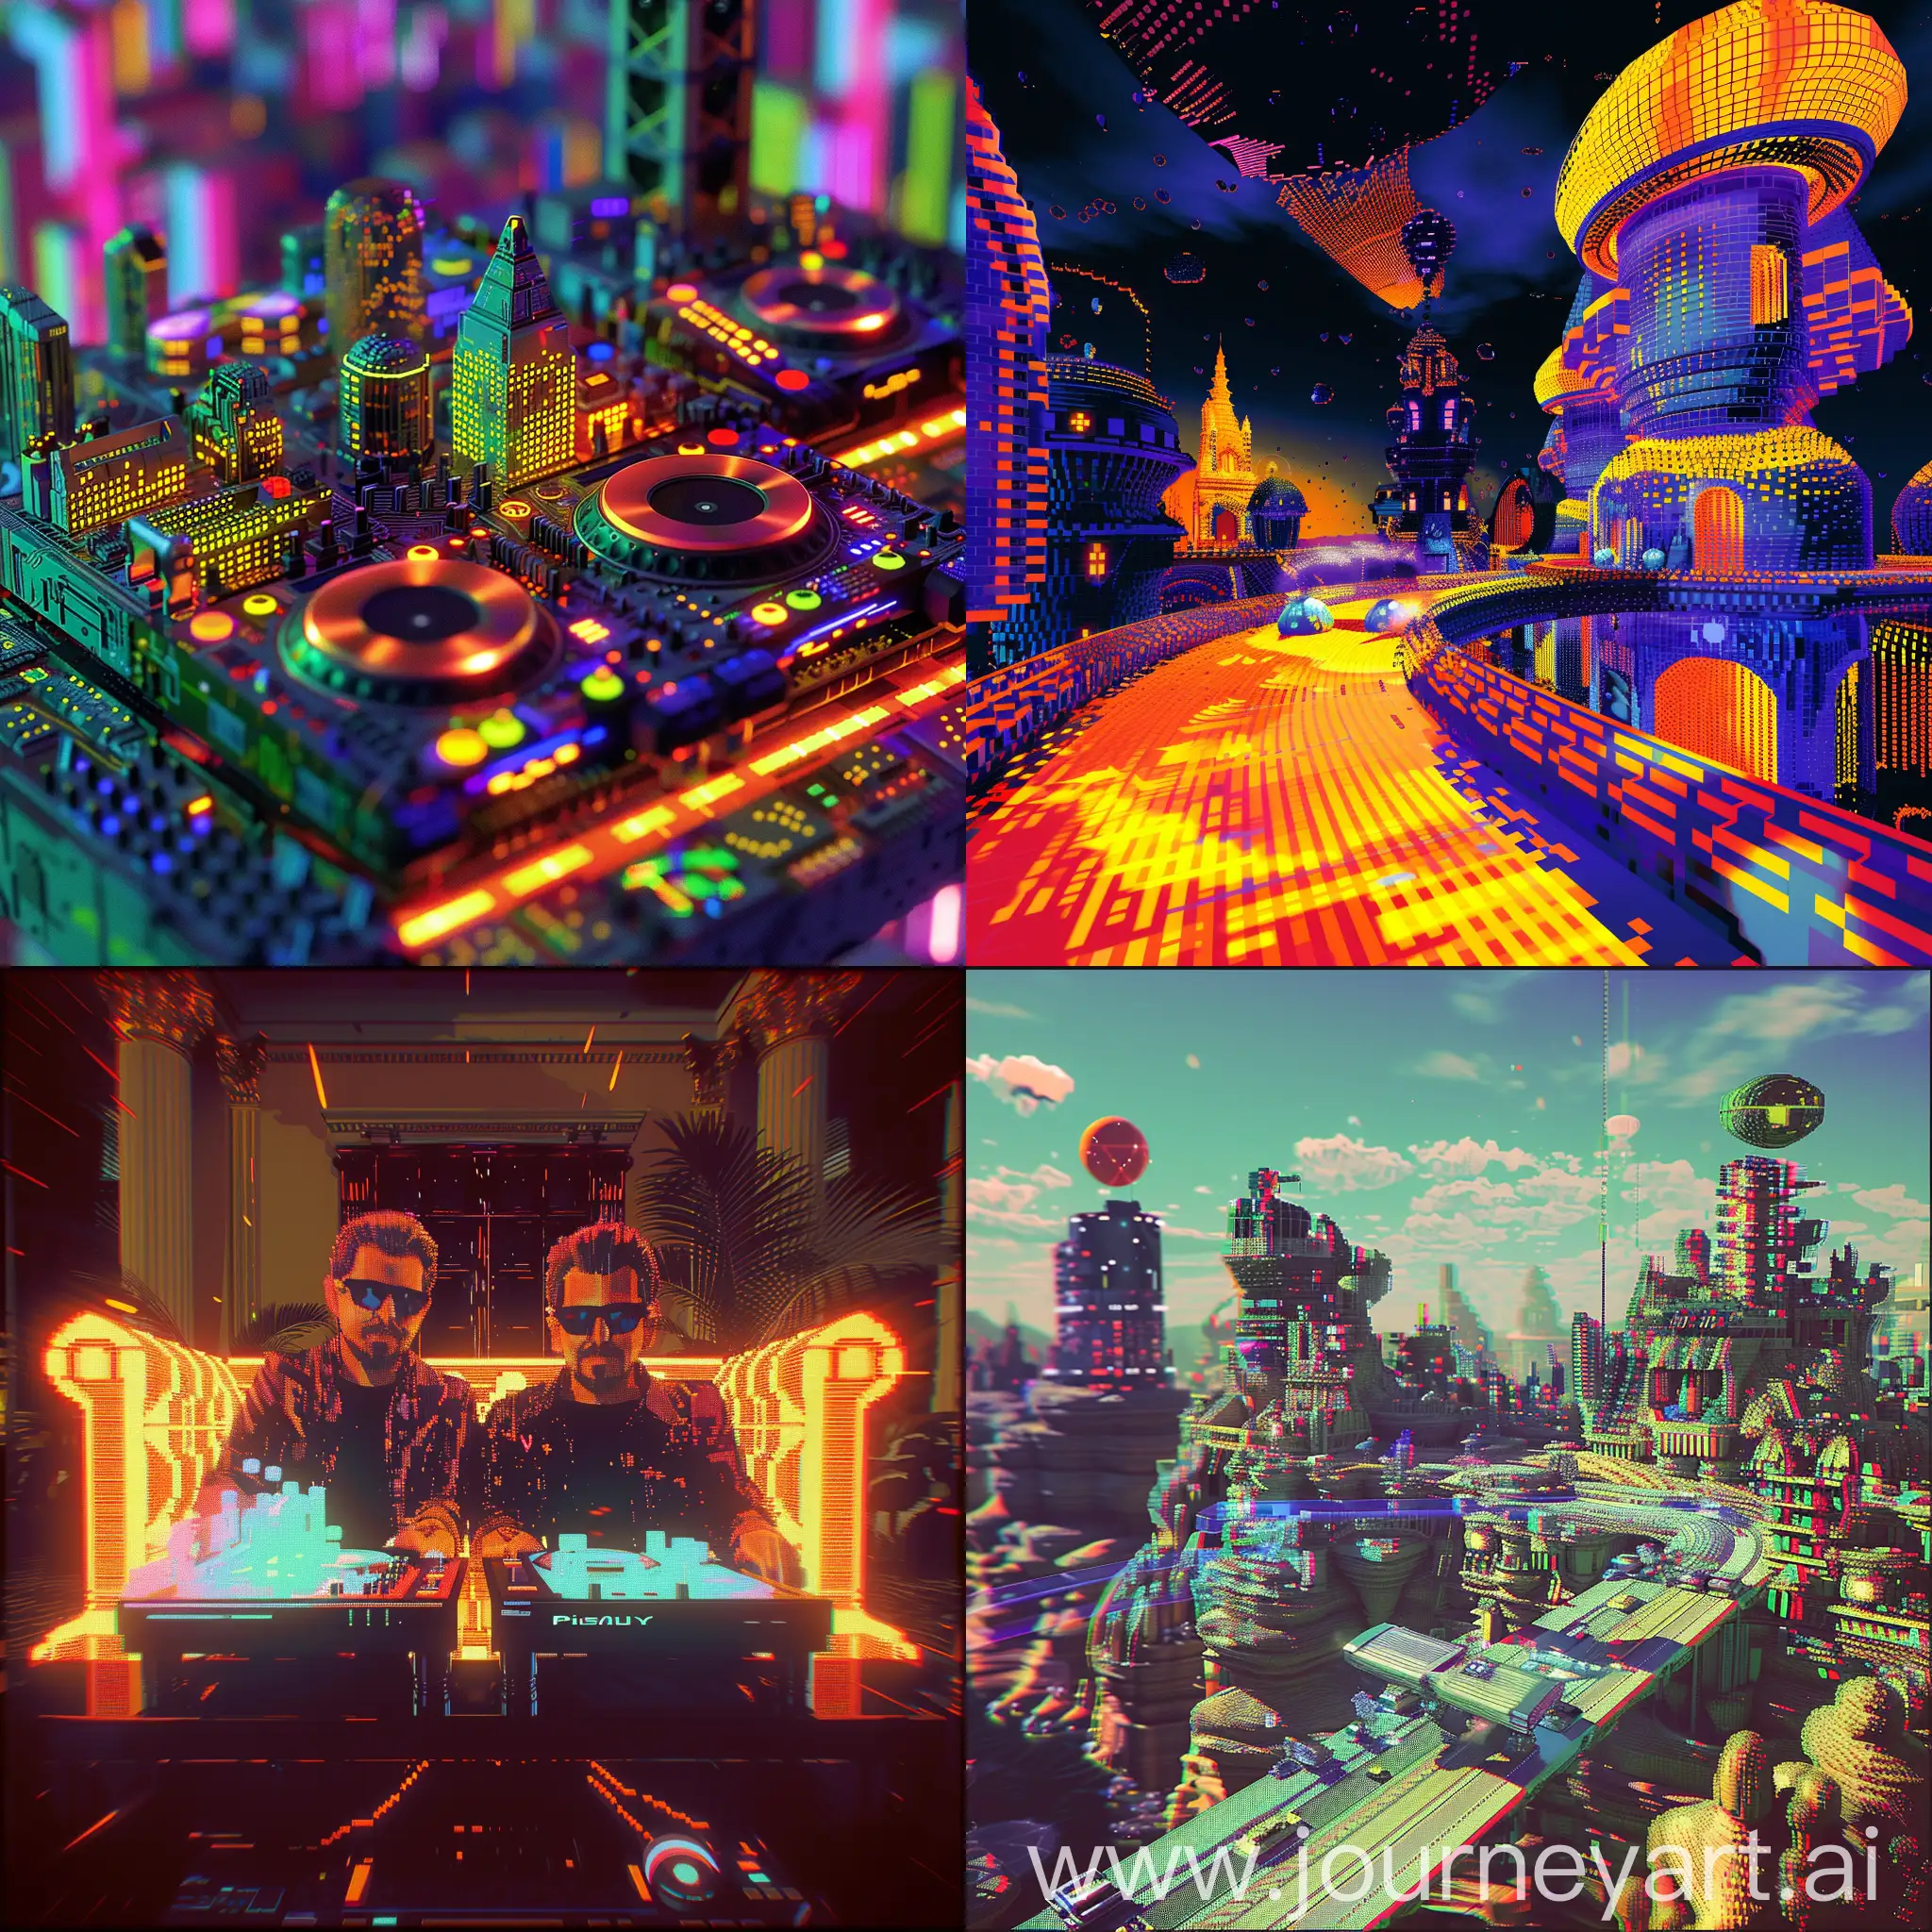 pixelated glitchart of DJ-duo Dimitri Vegas and Like Mike, ps1 playstation psx gamecube game screencapture, bryce 3d 